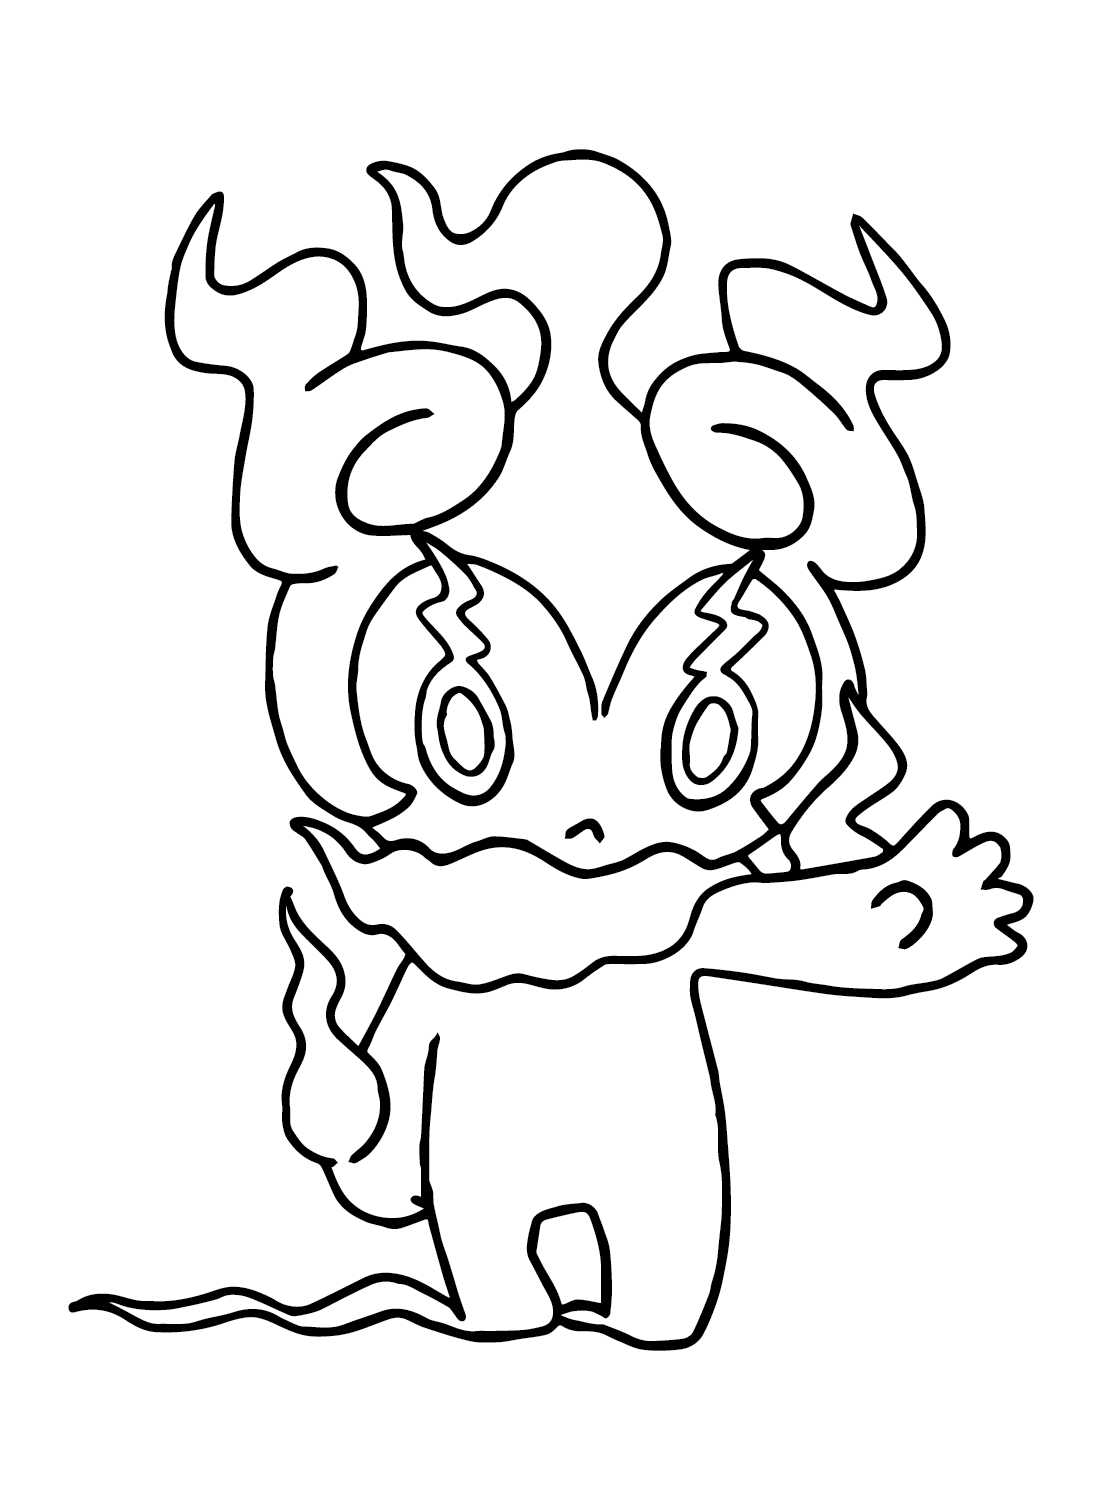 Lineart of Marshadow Coloring Page